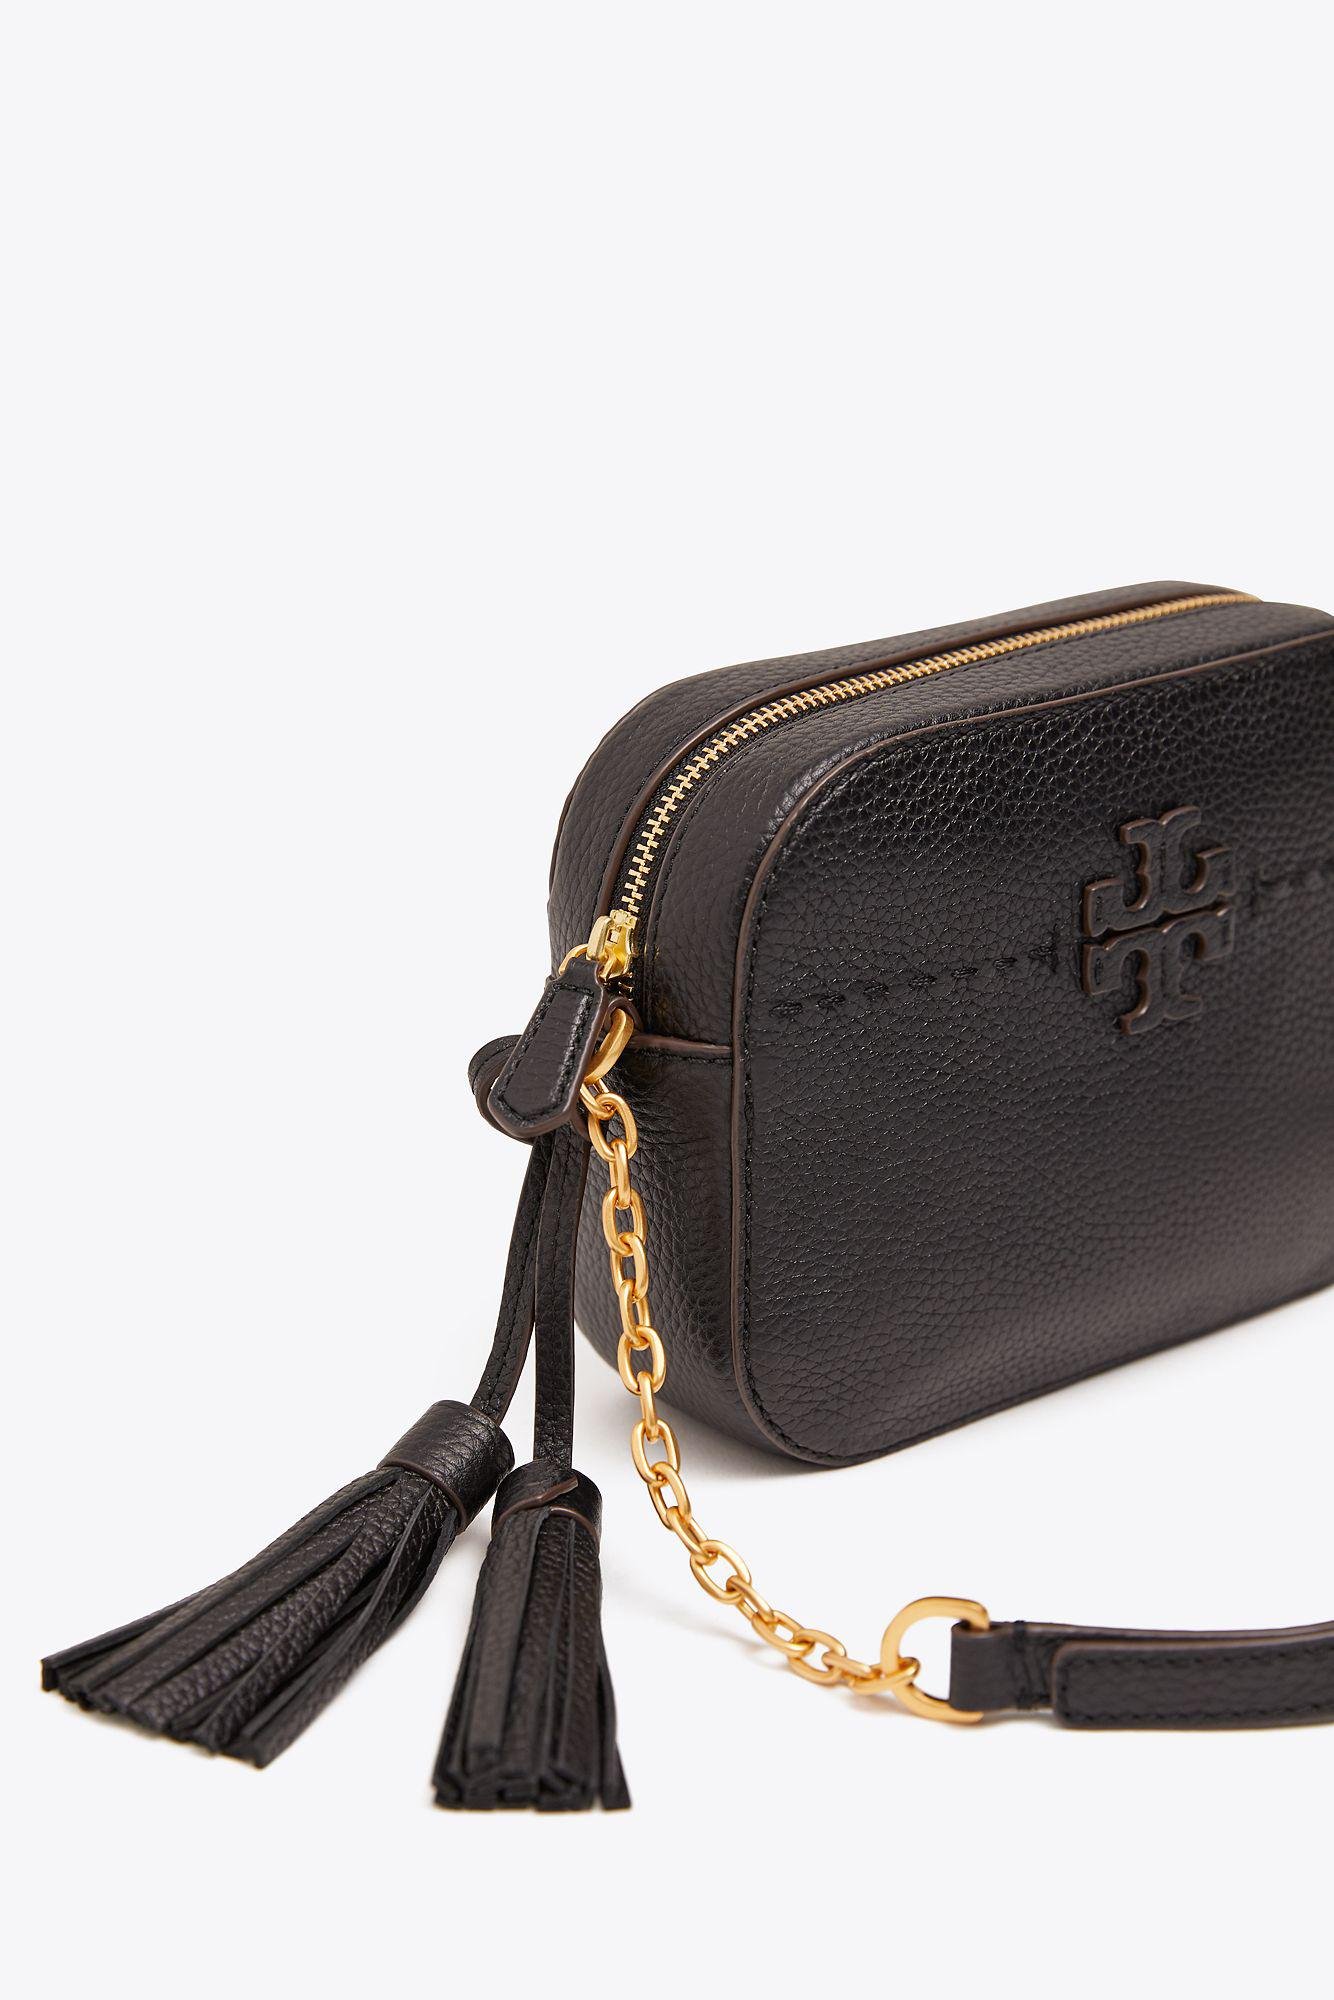 Tory Burch Leather Mcgraw Camera Bag in Black - Save 21% - Lyst